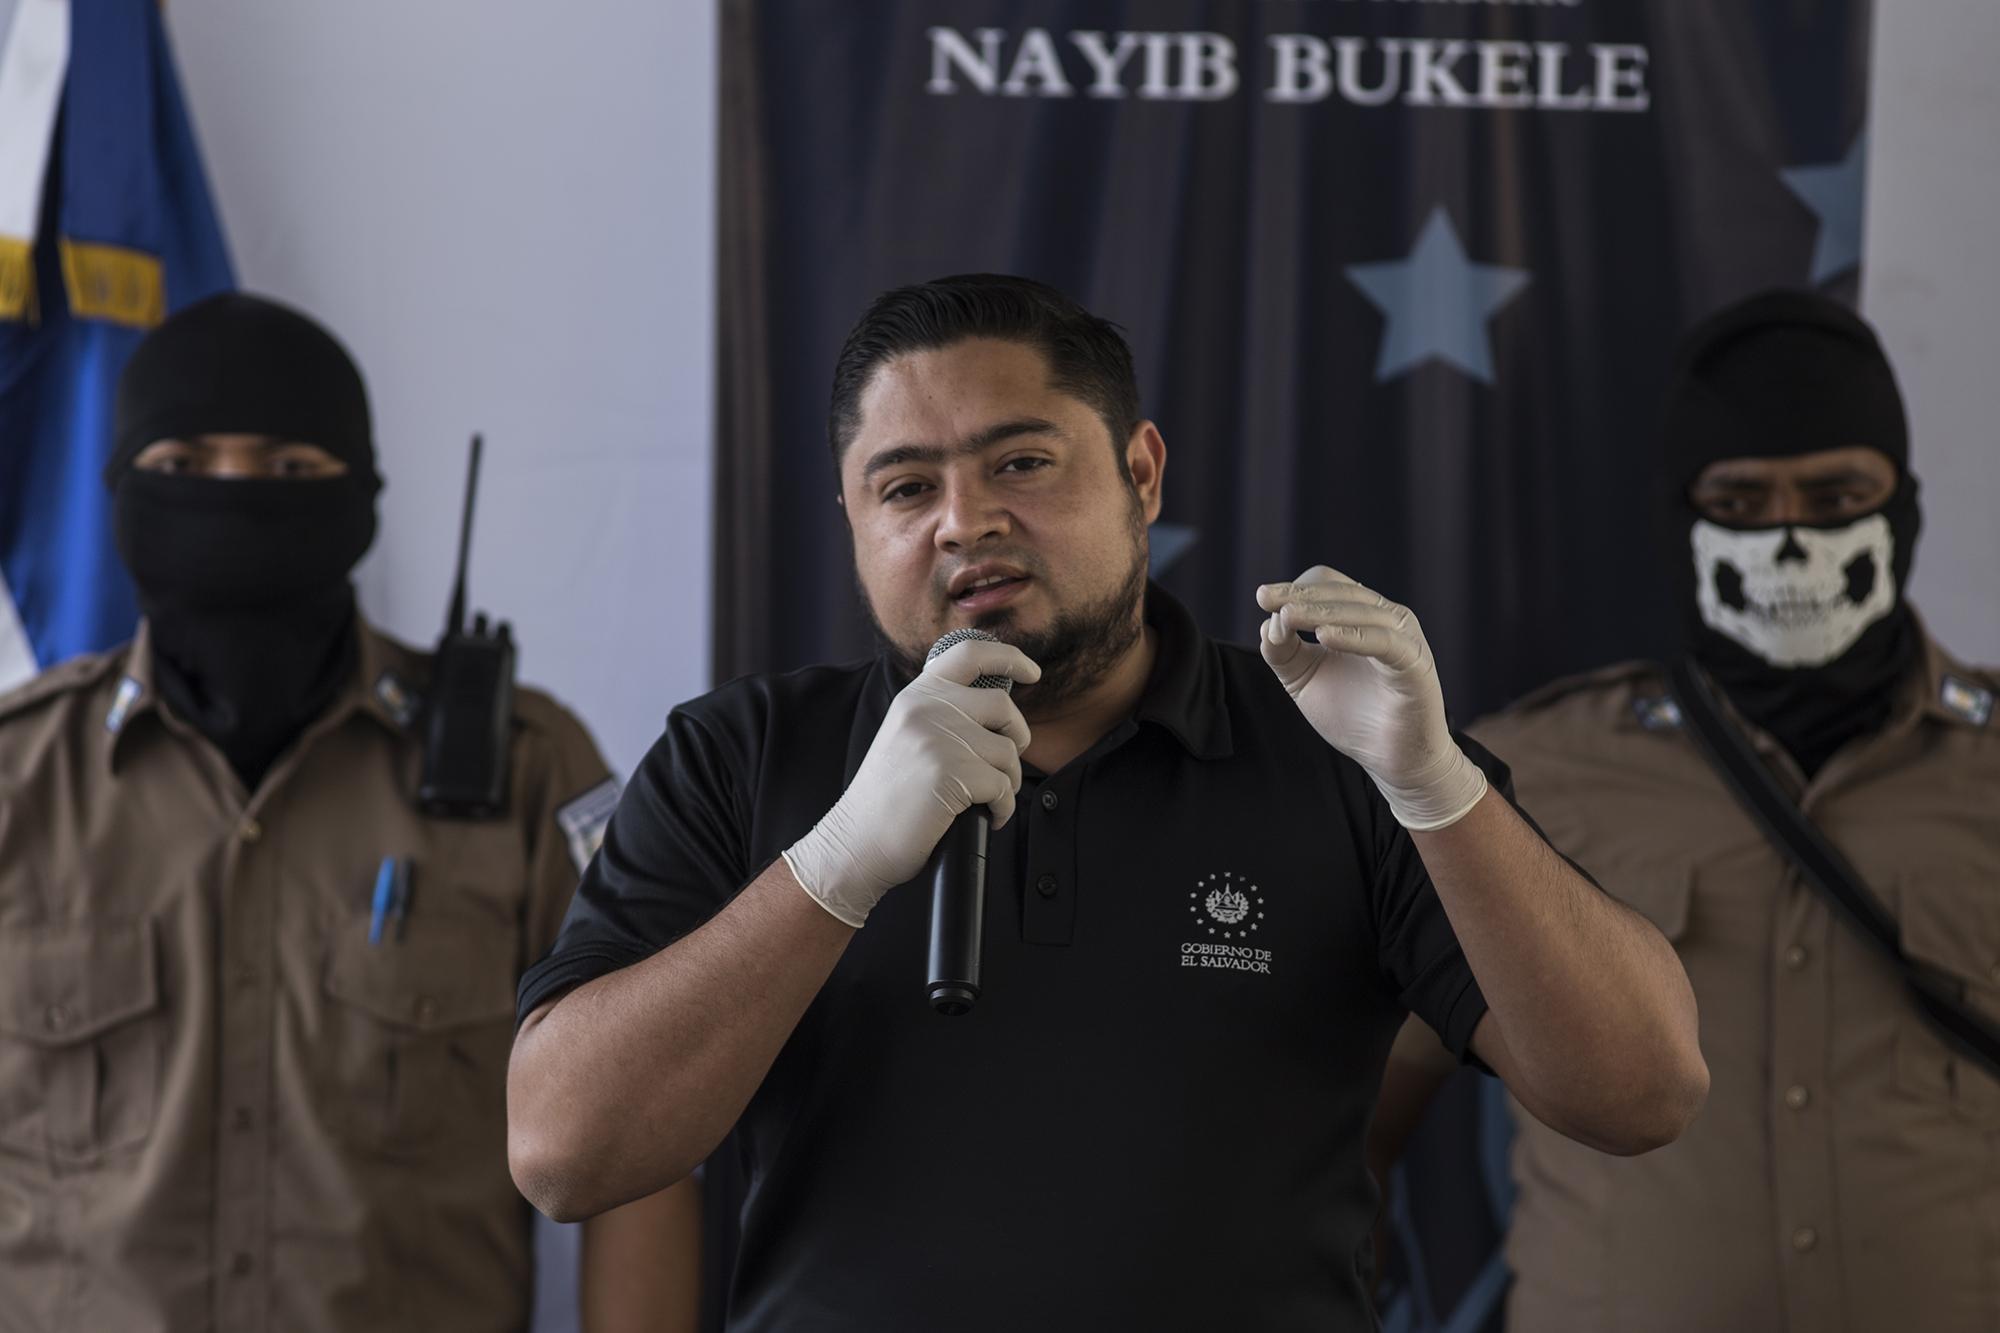 Osiris Luna Meza, director of Centros Penales, during a visit to Izalco Prison in the department of Sonsonate on April 27, 2020. That morning, Luna Meza announced the merging of cell blocks of opposing gangs as part of the government’s strategy to reduce homicides. Photo: Víctor Peña/El Faro